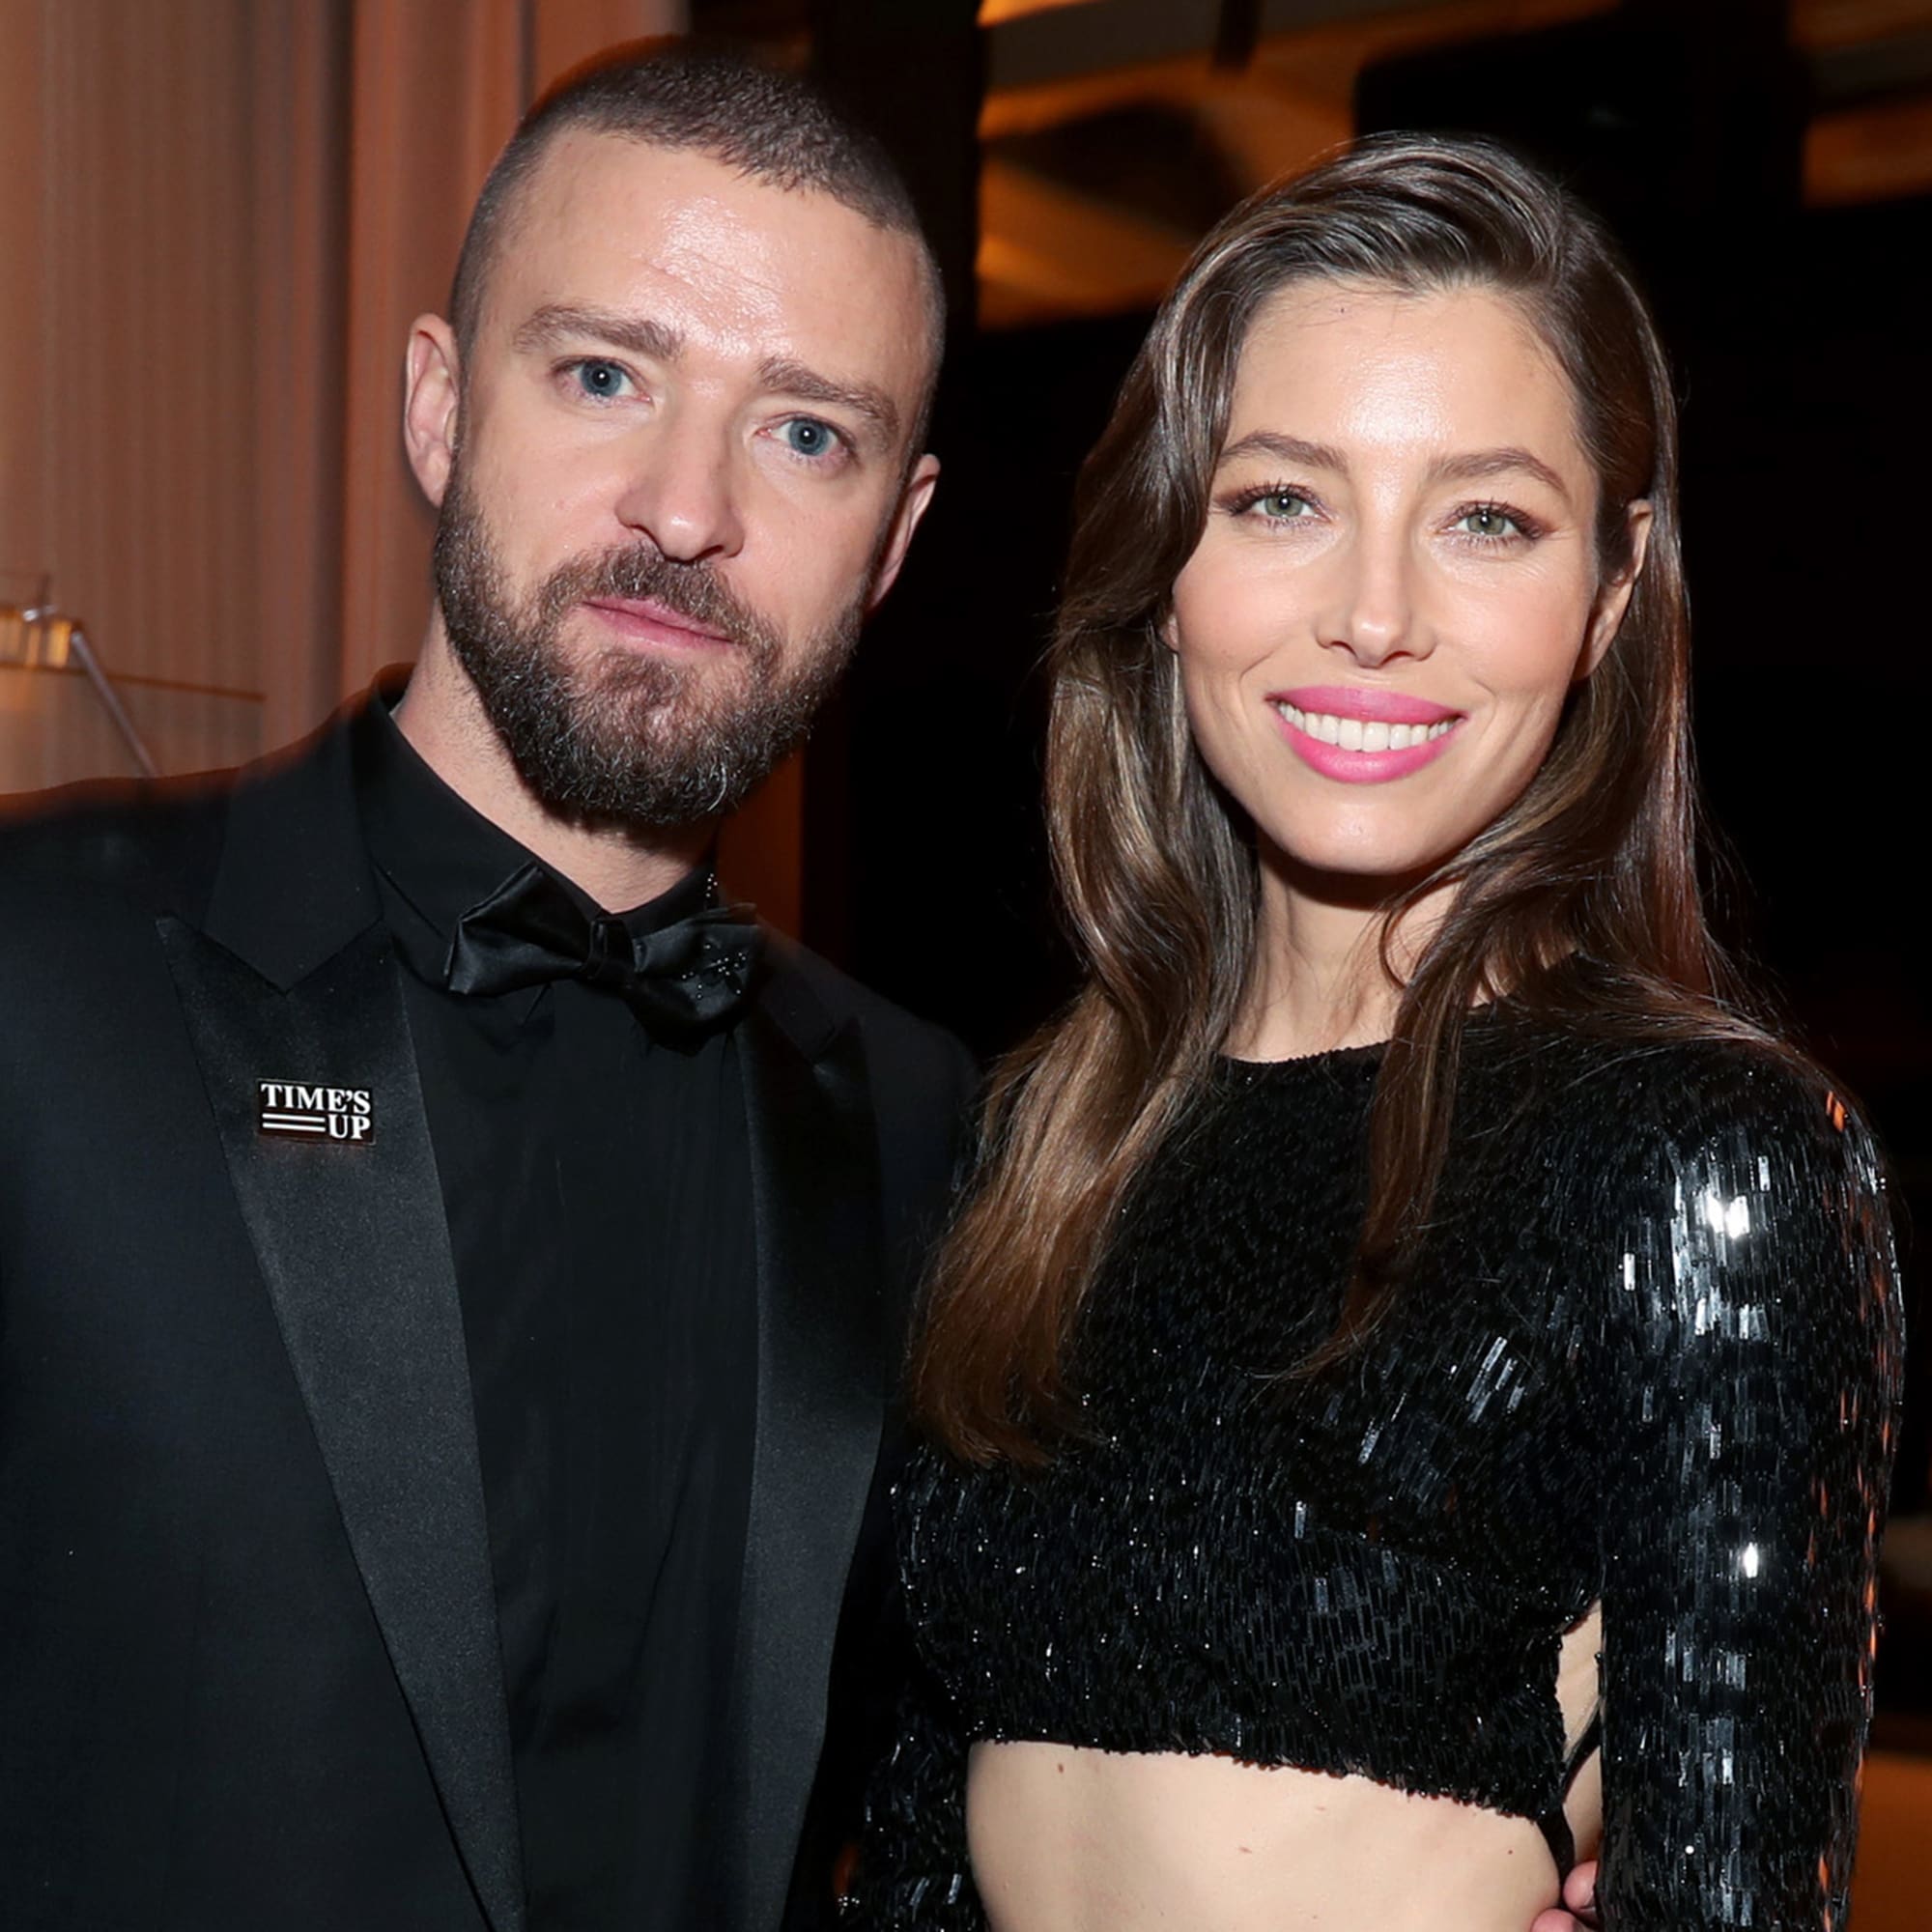 Justin Timberlake And Jessica Biel Take a PDA-Filled Vacation In Italy